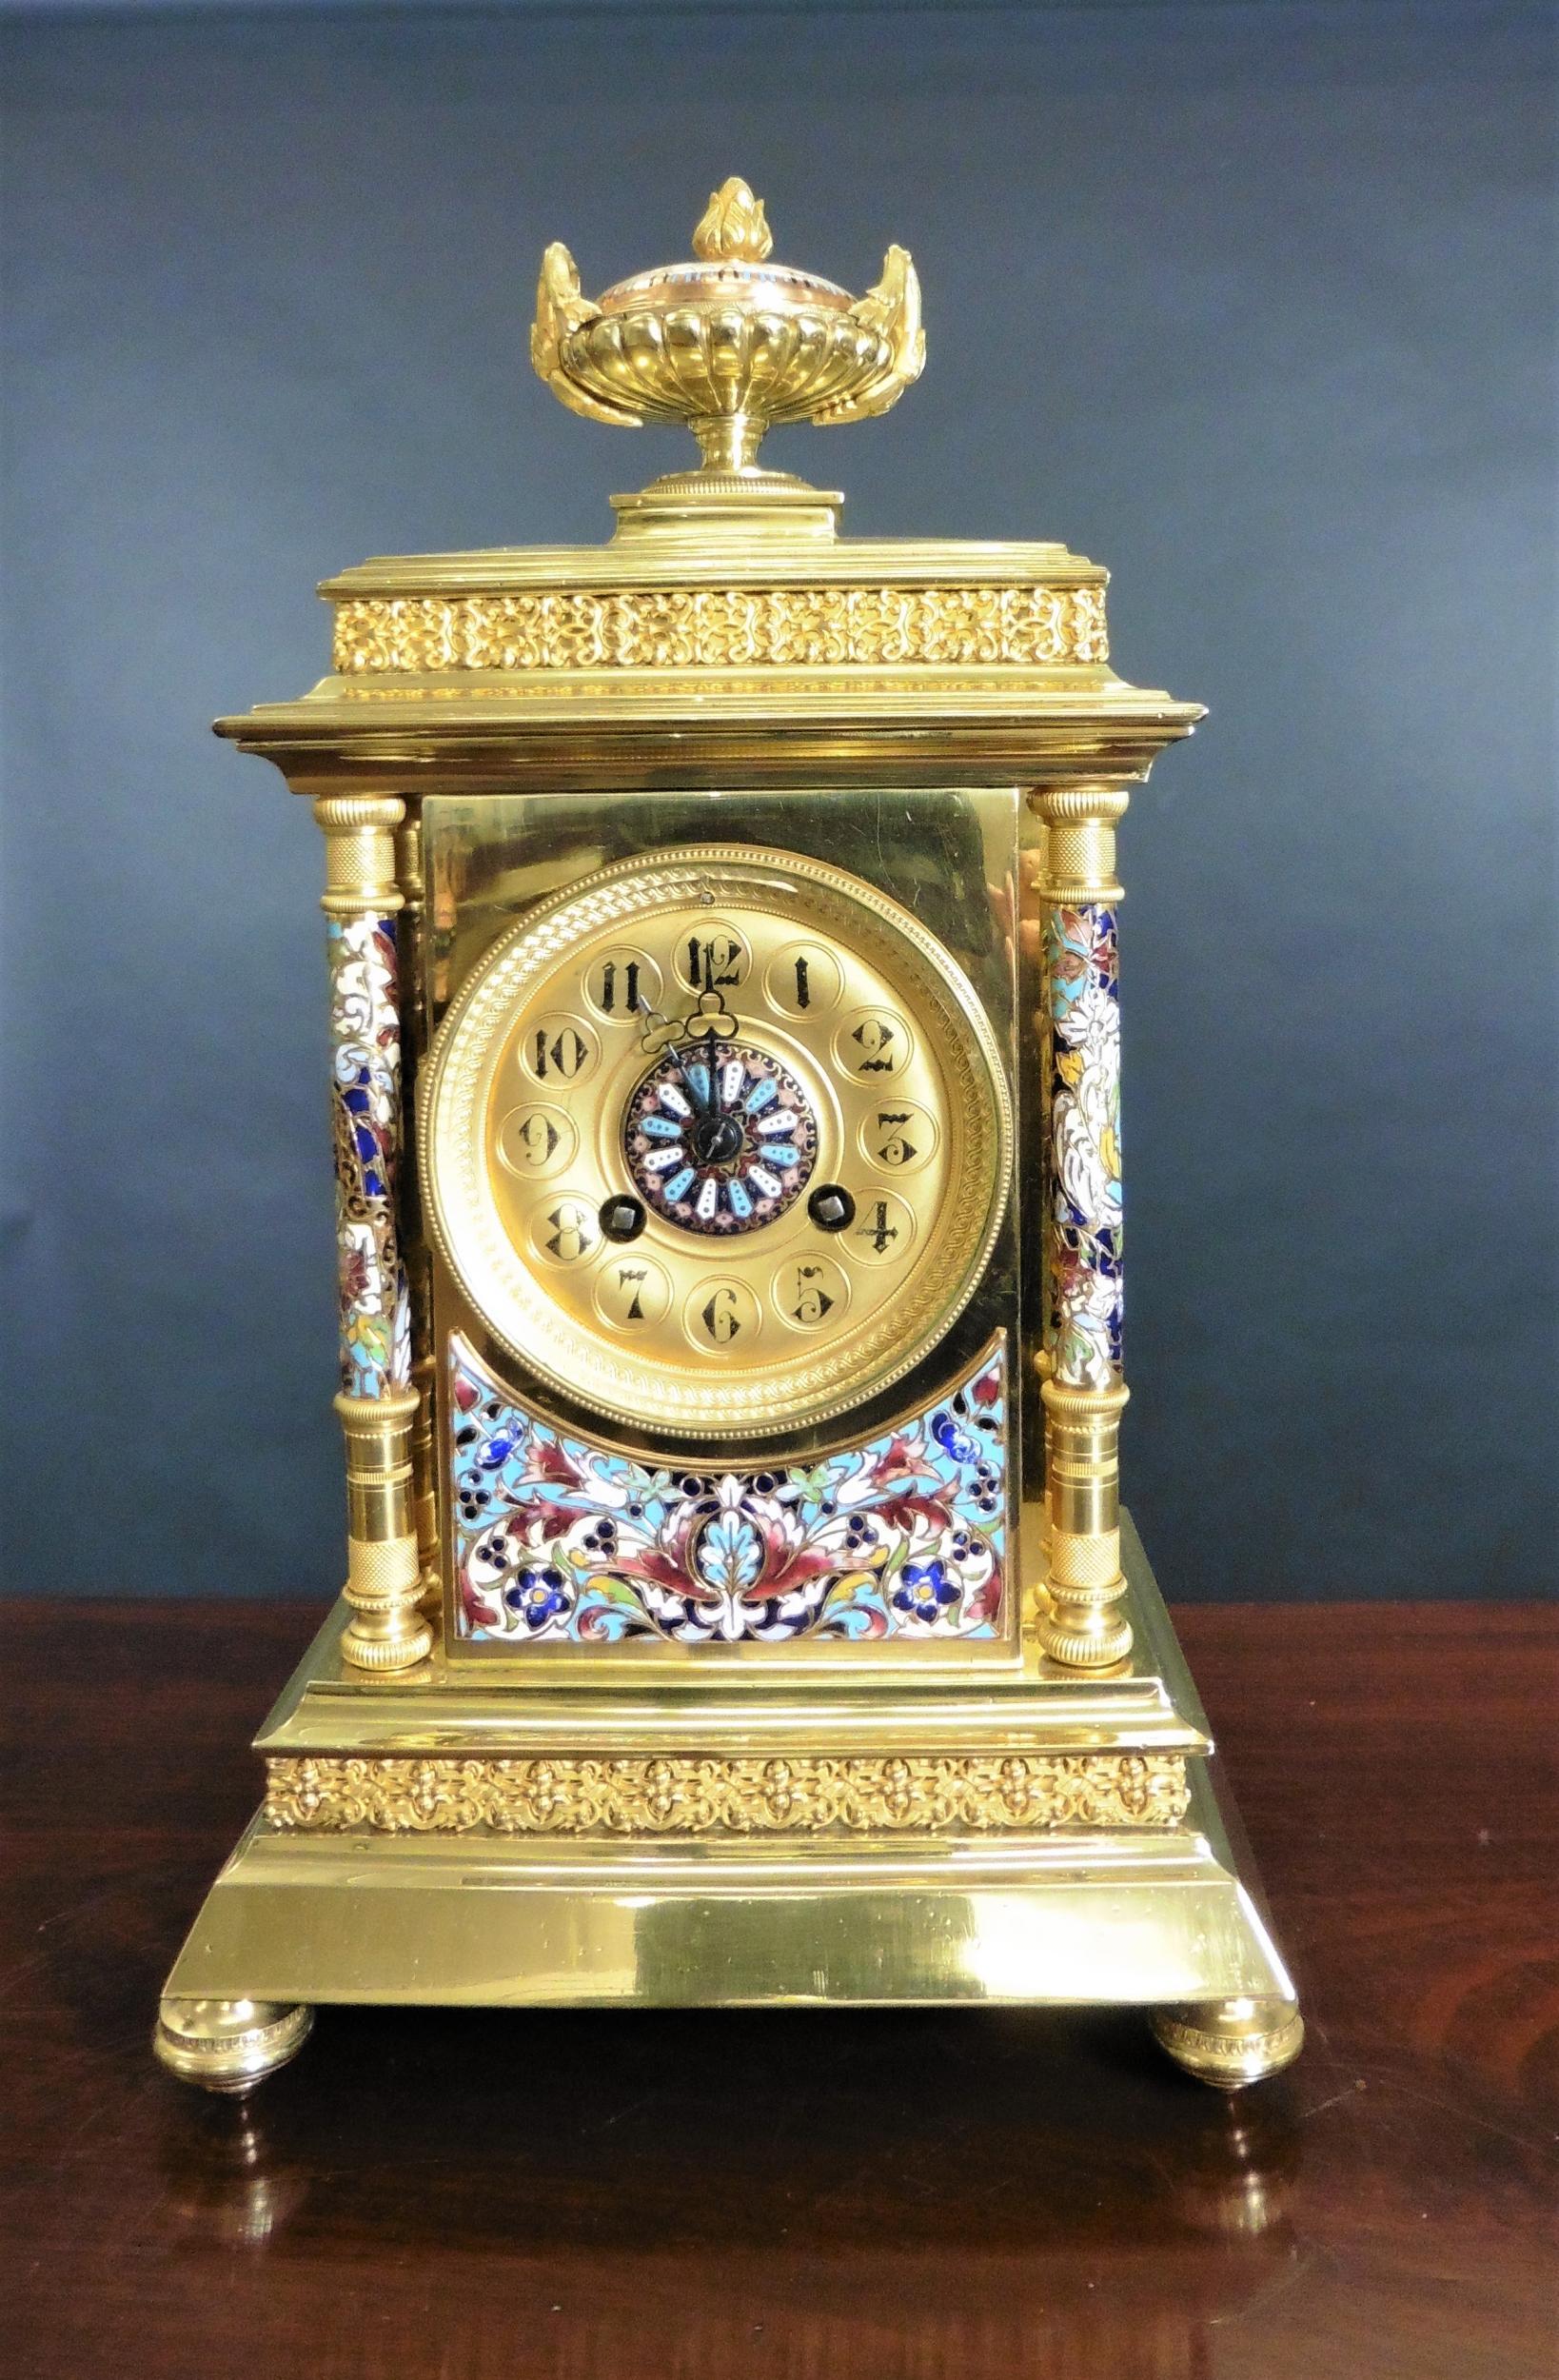 French gilt champleve clock garniture

Rectangular case standing on a stepped moulded base with turned feet, applied frieze decoration below a beautifully decorated champleve enamel panel with finely turned, chased blue champleve pillars with